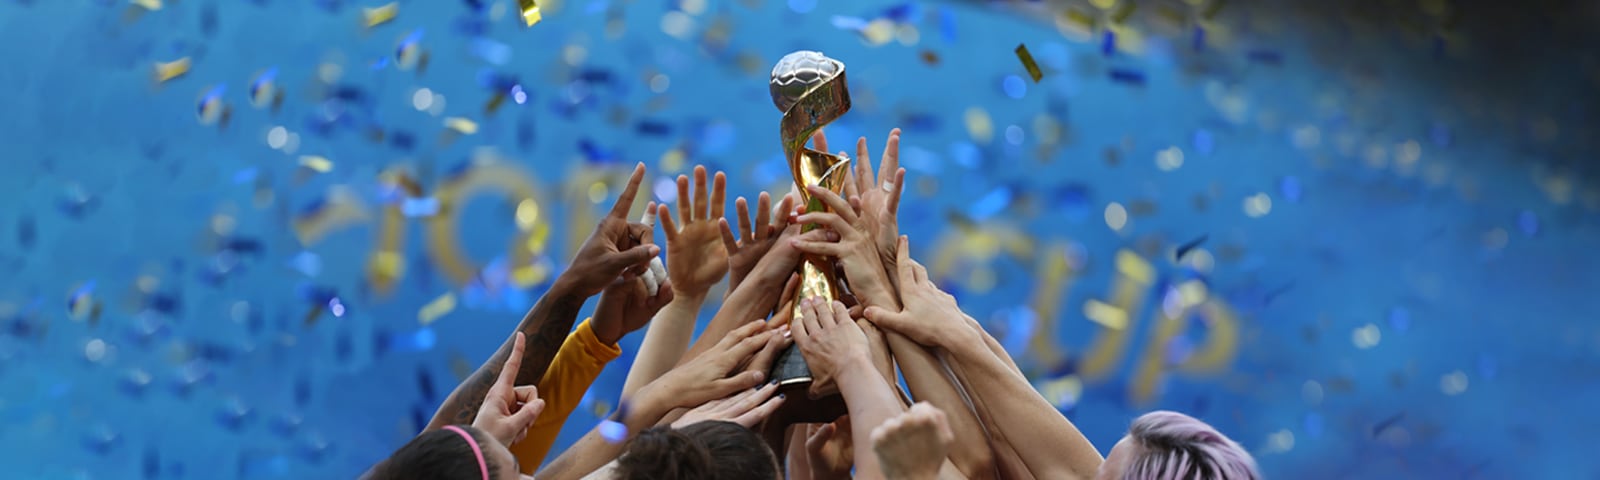 Cisco is an official sponsor of the FIFA Women's World Cup 2023